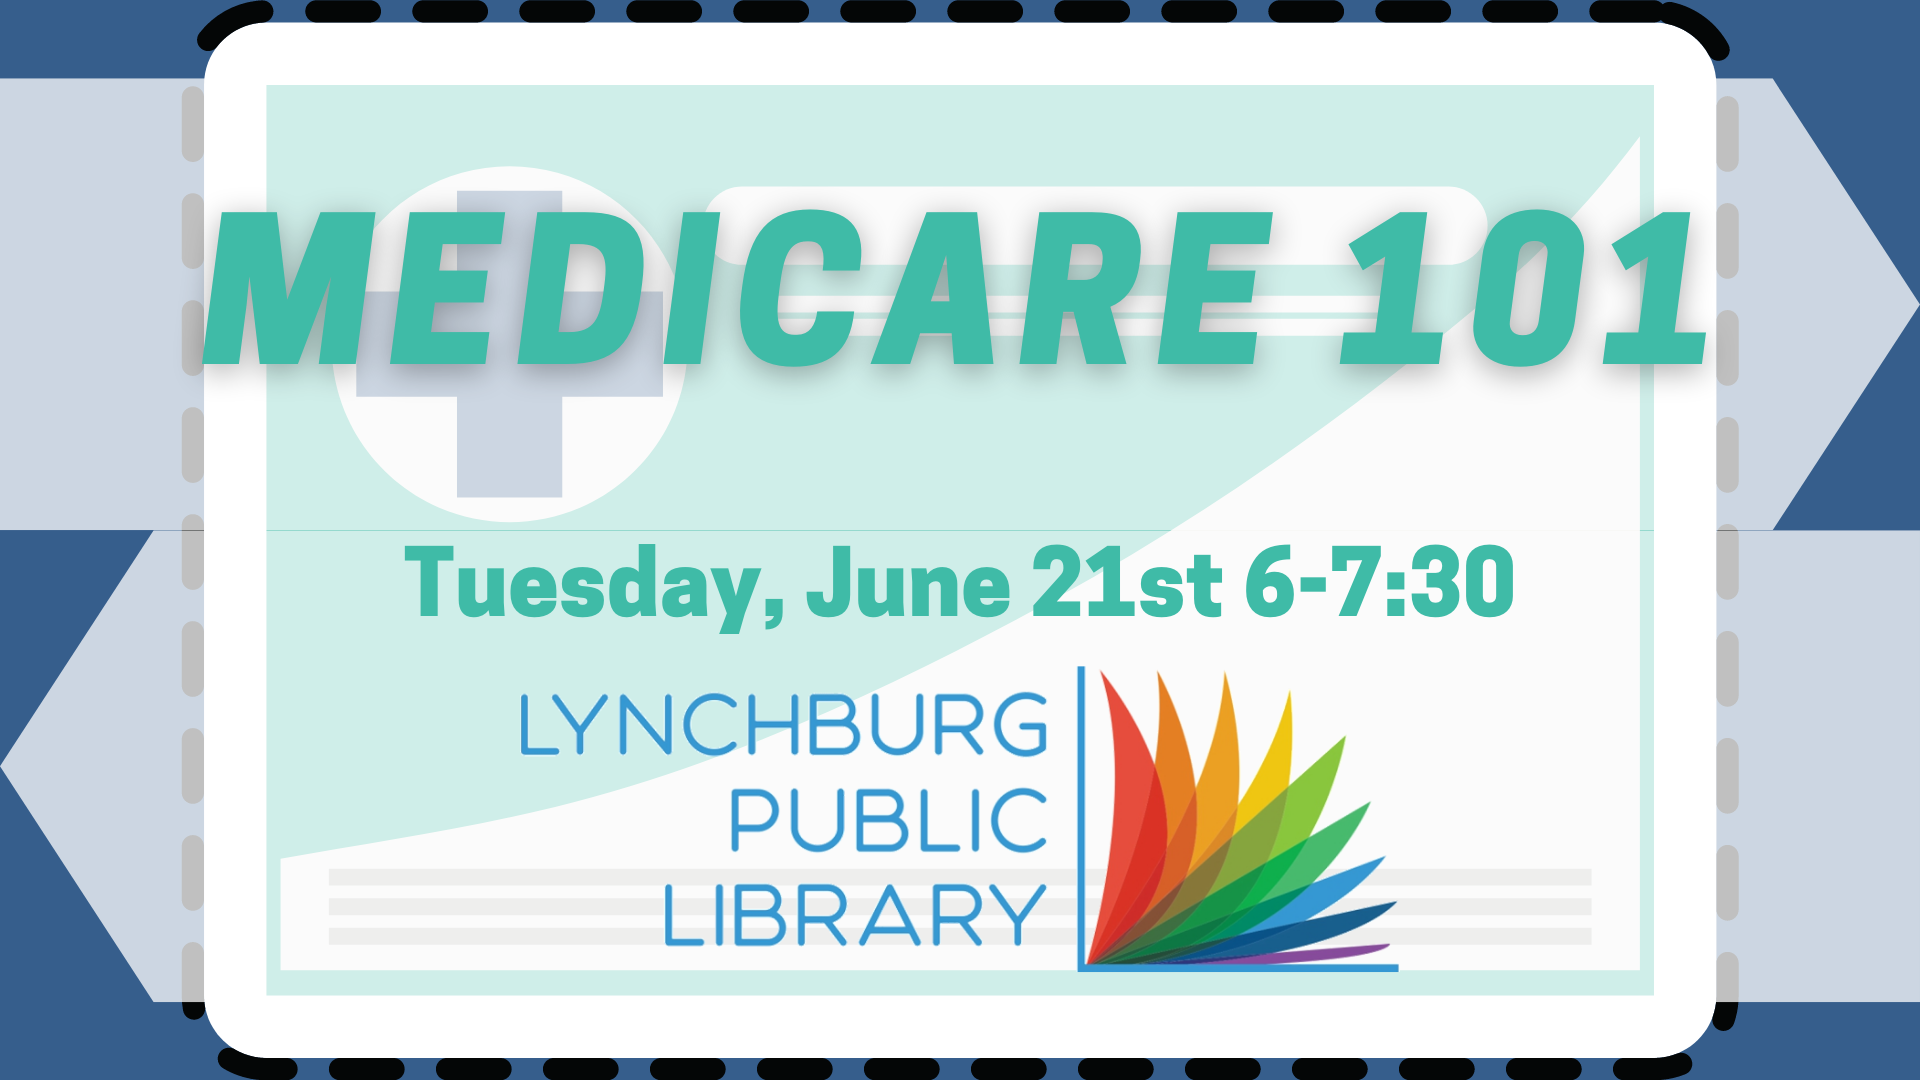 Medicare 101, Tuesday, June 21st 6-7:30